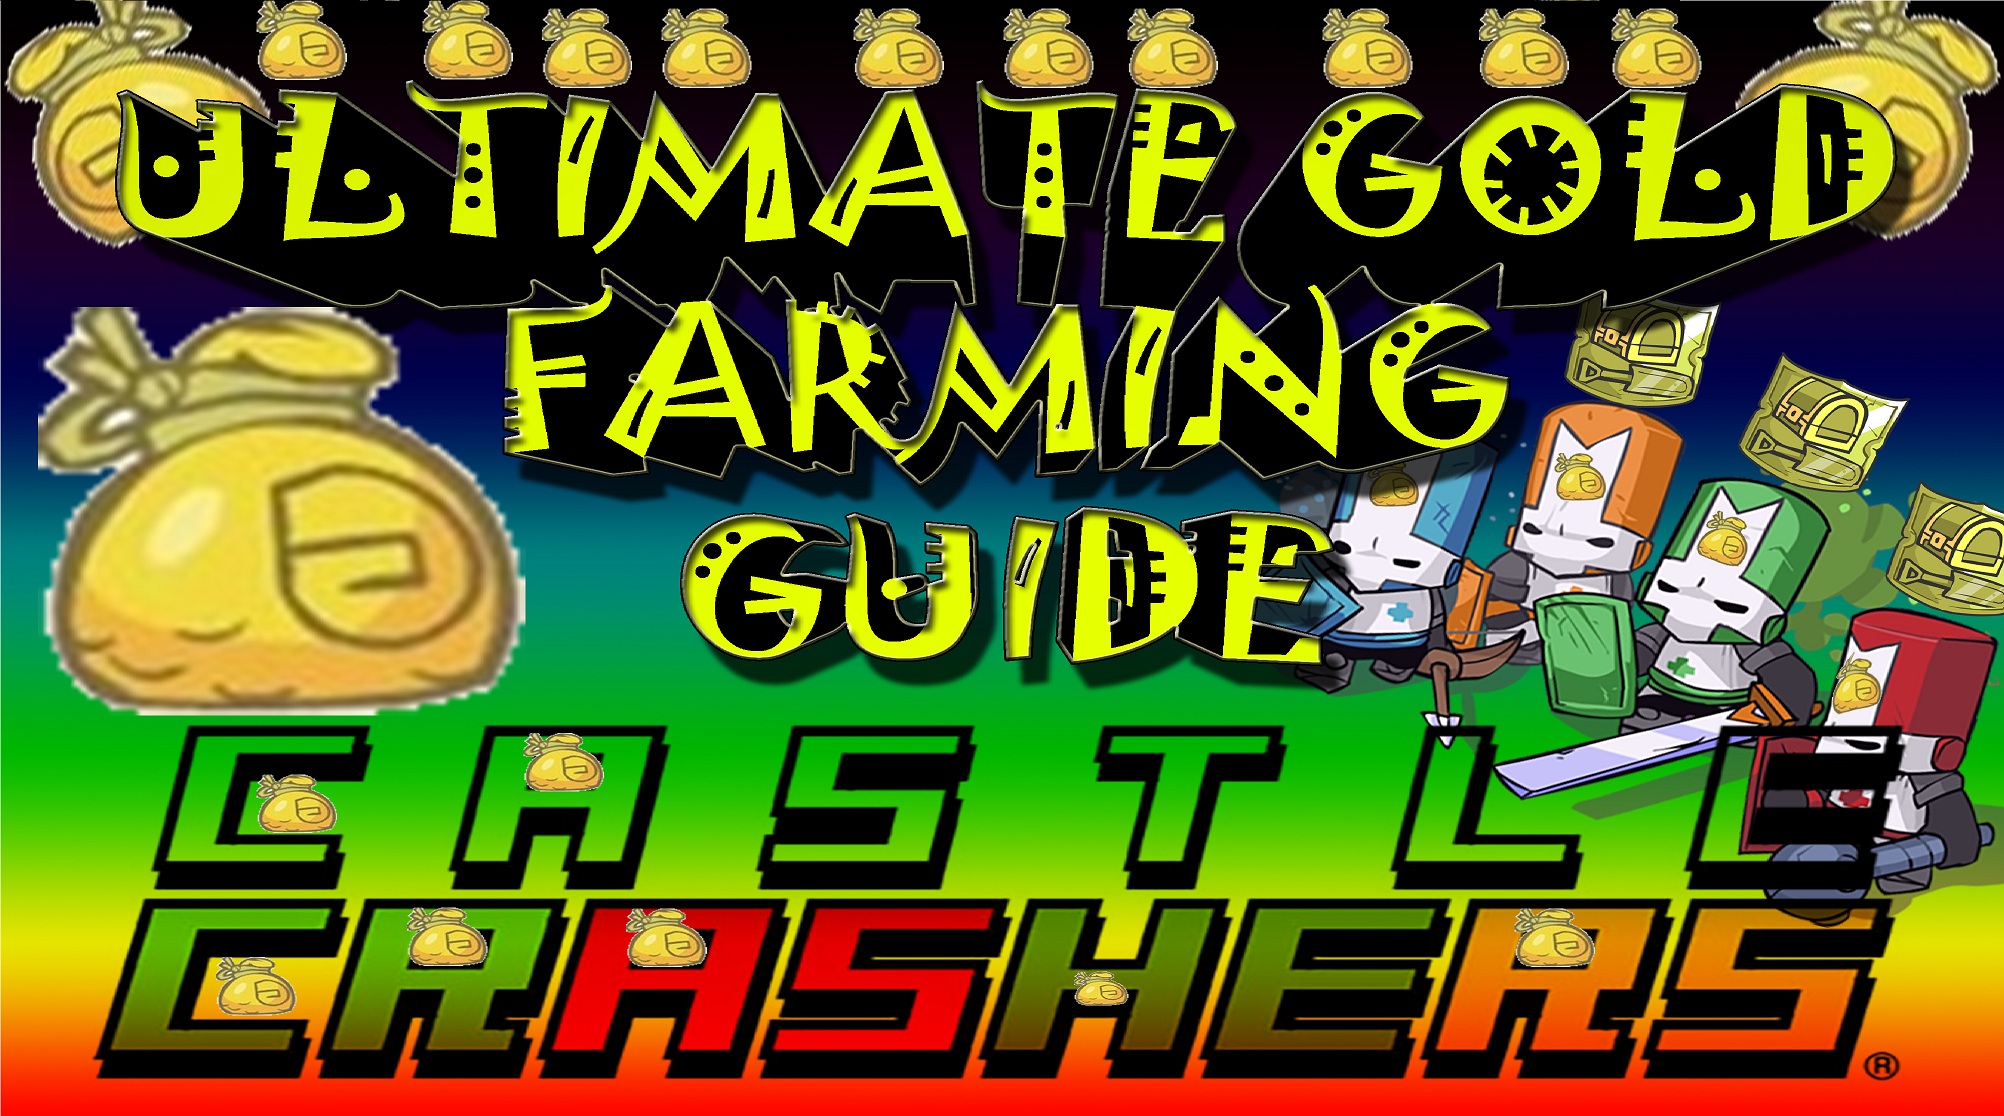 Castle Crashers - 3 BEST GOLD Farming Locations - Best Way to Farm Gold - For Lower/Higher Levels for Castle Crashers